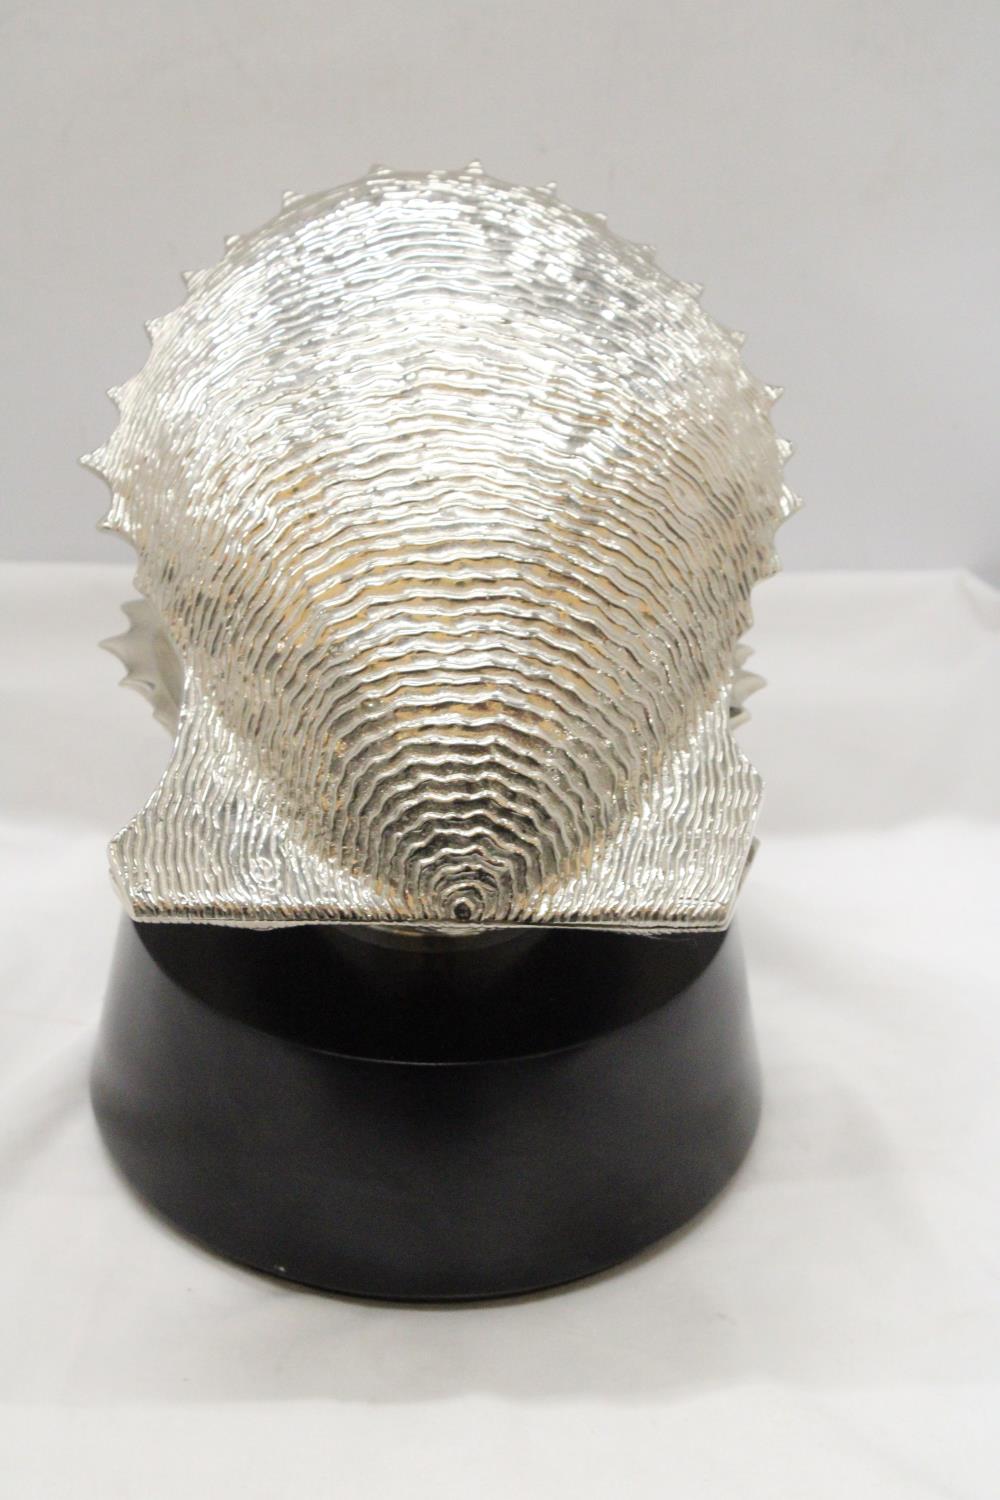 A LARGE CHROME OYSTER SHELL, ENCLOSING A BENTLEY CAR, ON A BASE, HEIGHT 30CM, DIAMETER APPROX 24CM - Image 5 of 6